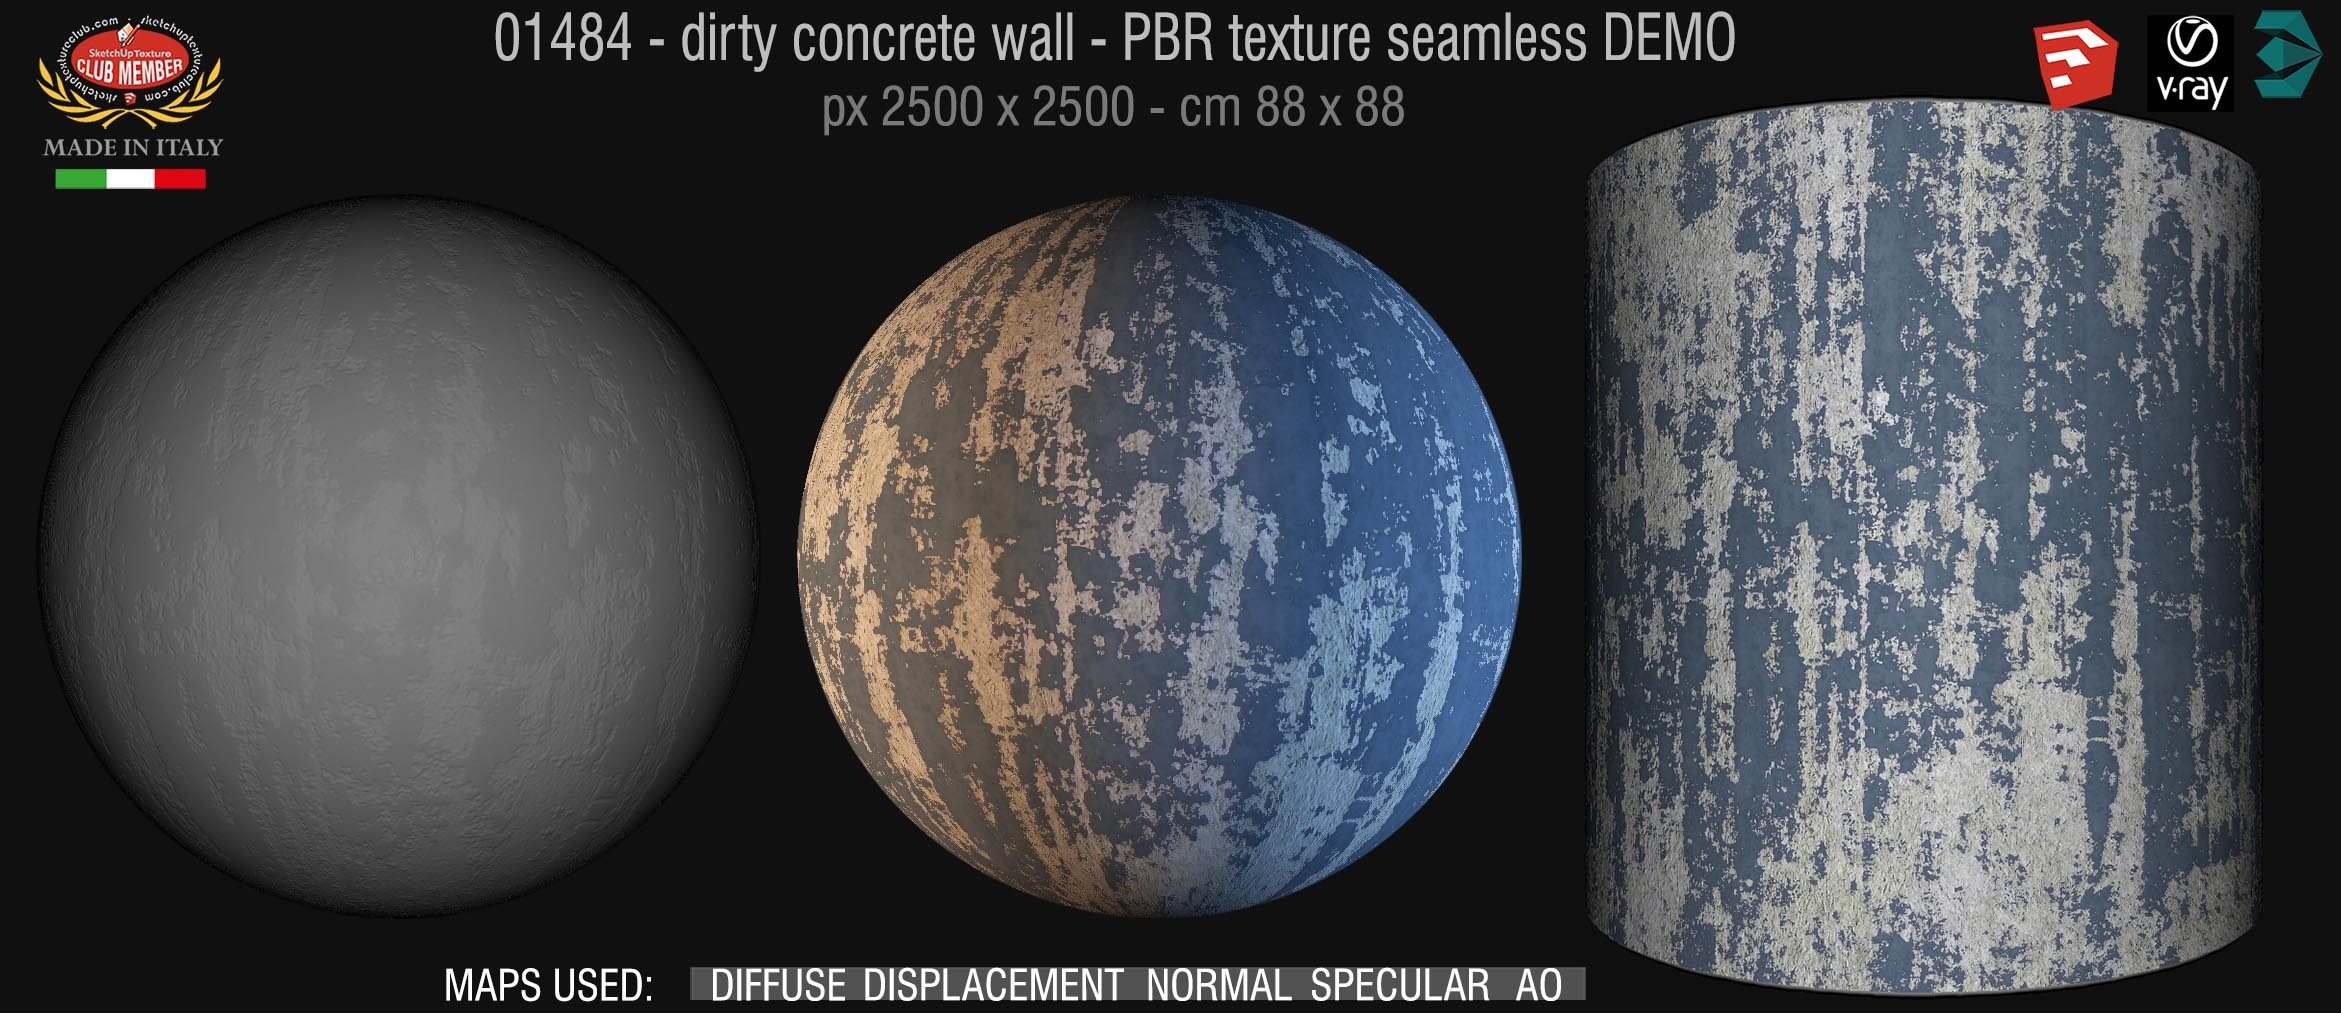 01484 Concrete bare dirty wall PBR texture seamless DEMO